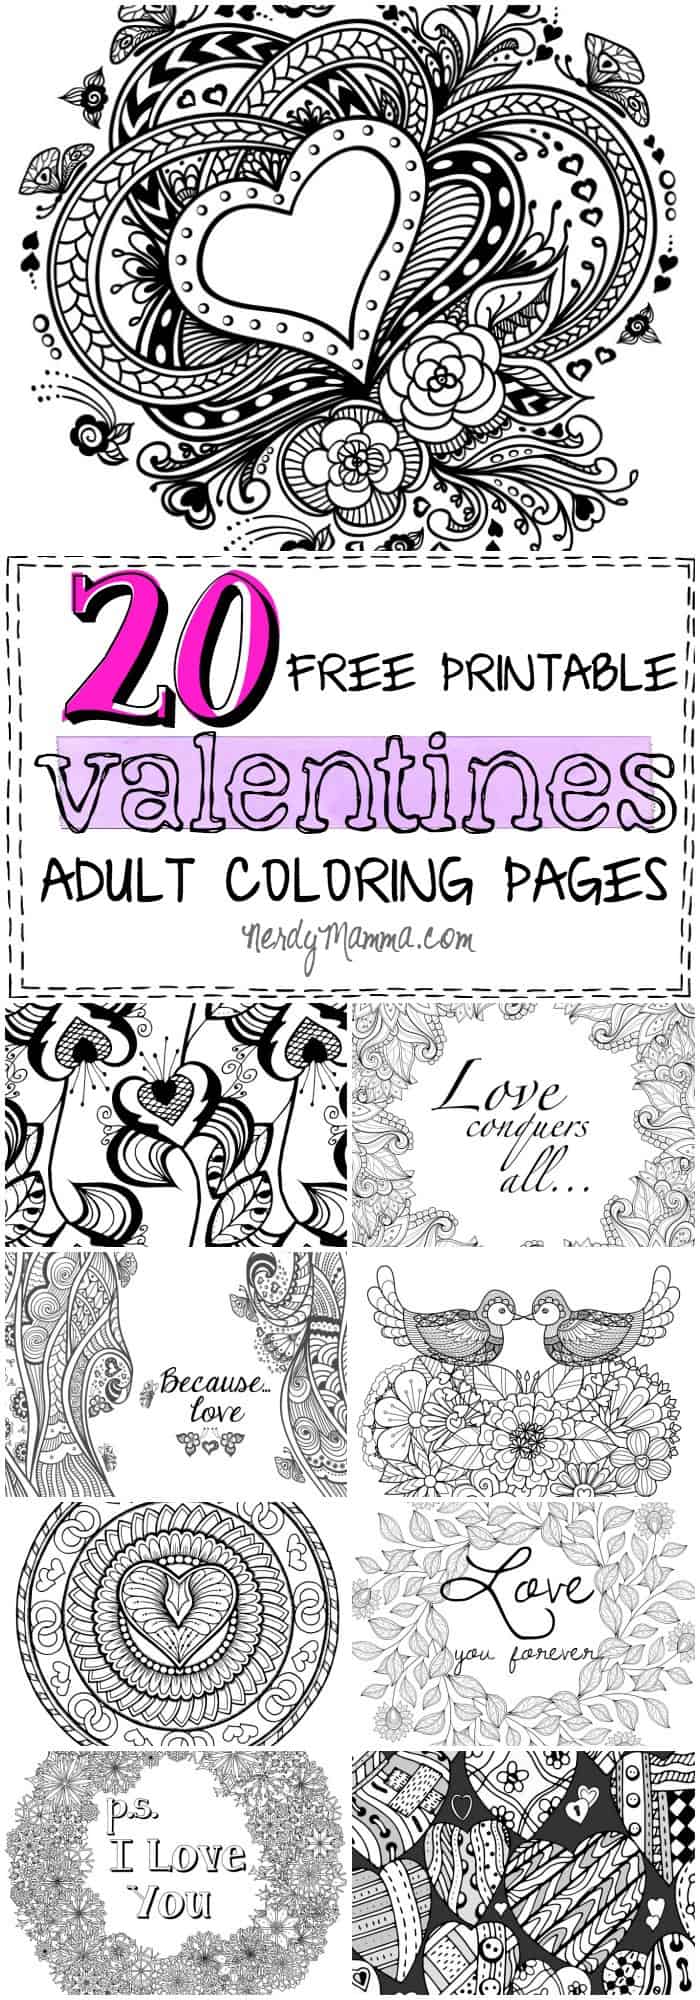 These 20 Valentines Free Printable Adult Coloring Pages are so awesome. I love coloring and these are so full of--well, love! P